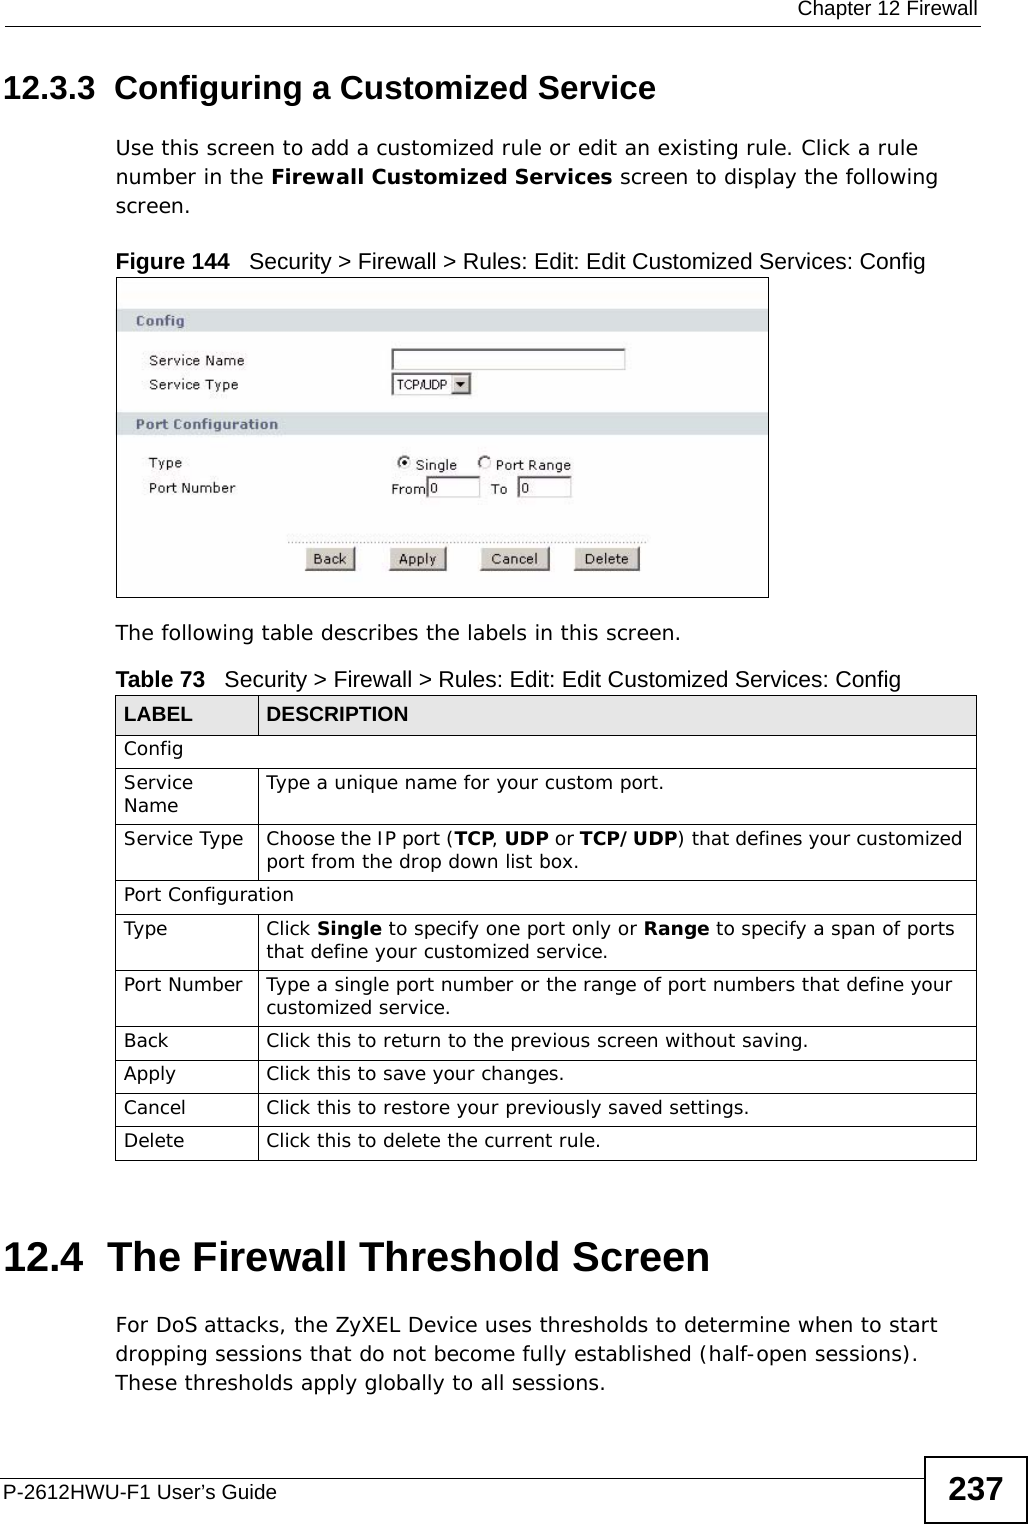  Chapter 12 FirewallP-2612HWU-F1 User’s Guide 23712.3.3  Configuring a Customized Service  Use this screen to add a customized rule or edit an existing rule. Click a rule number in the Firewall Customized Services screen to display the following screen.Figure 144   Security &gt; Firewall &gt; Rules: Edit: Edit Customized Services: ConfigThe following table describes the labels in this screen.12.4  The Firewall Threshold ScreenFor DoS attacks, the ZyXEL Device uses thresholds to determine when to start dropping sessions that do not become fully established (half-open sessions). These thresholds apply globally to all sessions.Table 73   Security &gt; Firewall &gt; Rules: Edit: Edit Customized Services: ConfigLABEL DESCRIPTIONConfigService Name Type a unique name for your custom port.Service Type Choose the IP port (TCP, UDP or TCP/UDP) that defines your customized port from the drop down list box.Port ConfigurationType Click Single to specify one port only or Range to specify a span of ports that define your customized service. Port Number Type a single port number or the range of port numbers that define your customized service.Back Click this to return to the previous screen without saving.Apply Click this to save your changes.Cancel Click this to restore your previously saved settings.Delete Click this to delete the current rule.